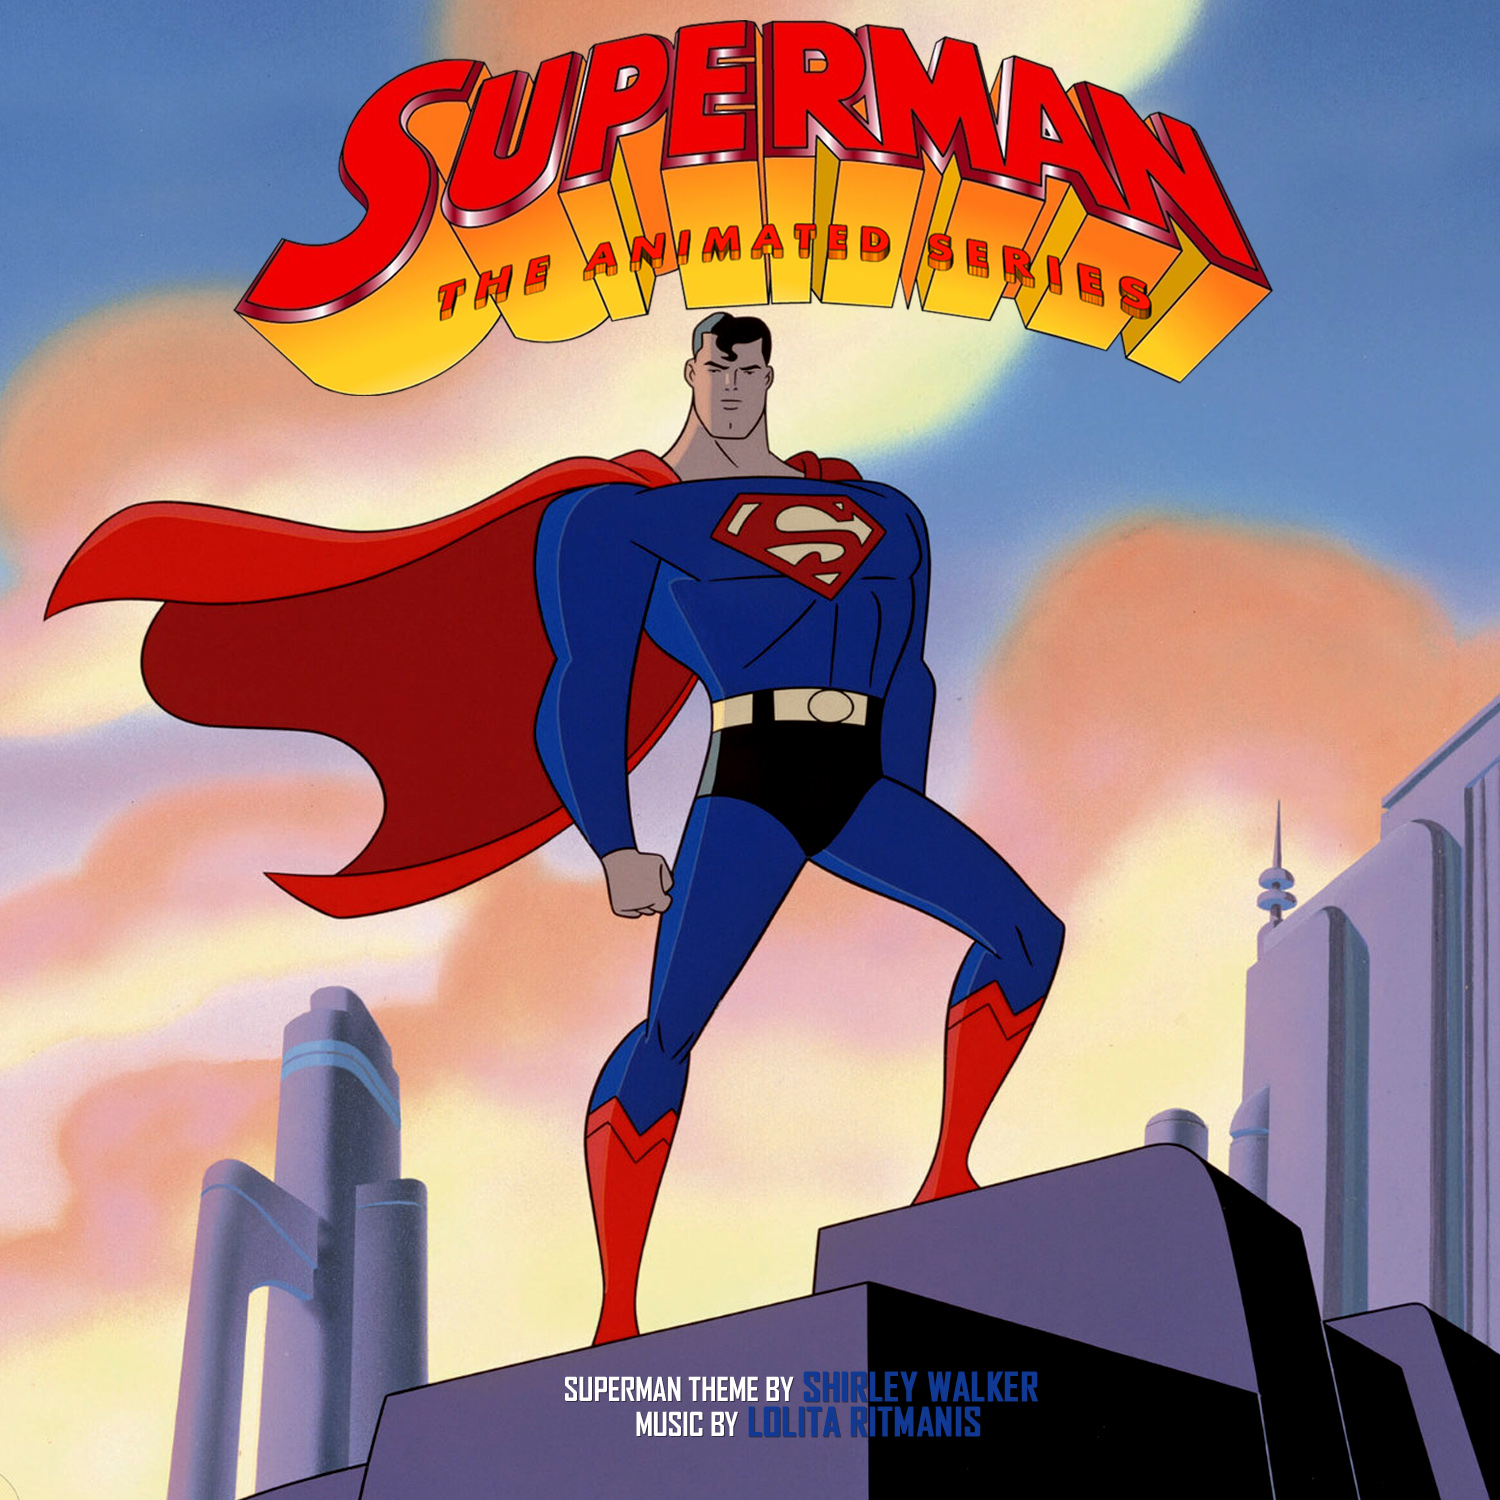 SATURDAY MORNINGS FOREVER: SUPERMAN: THE ANIMATED SERIES